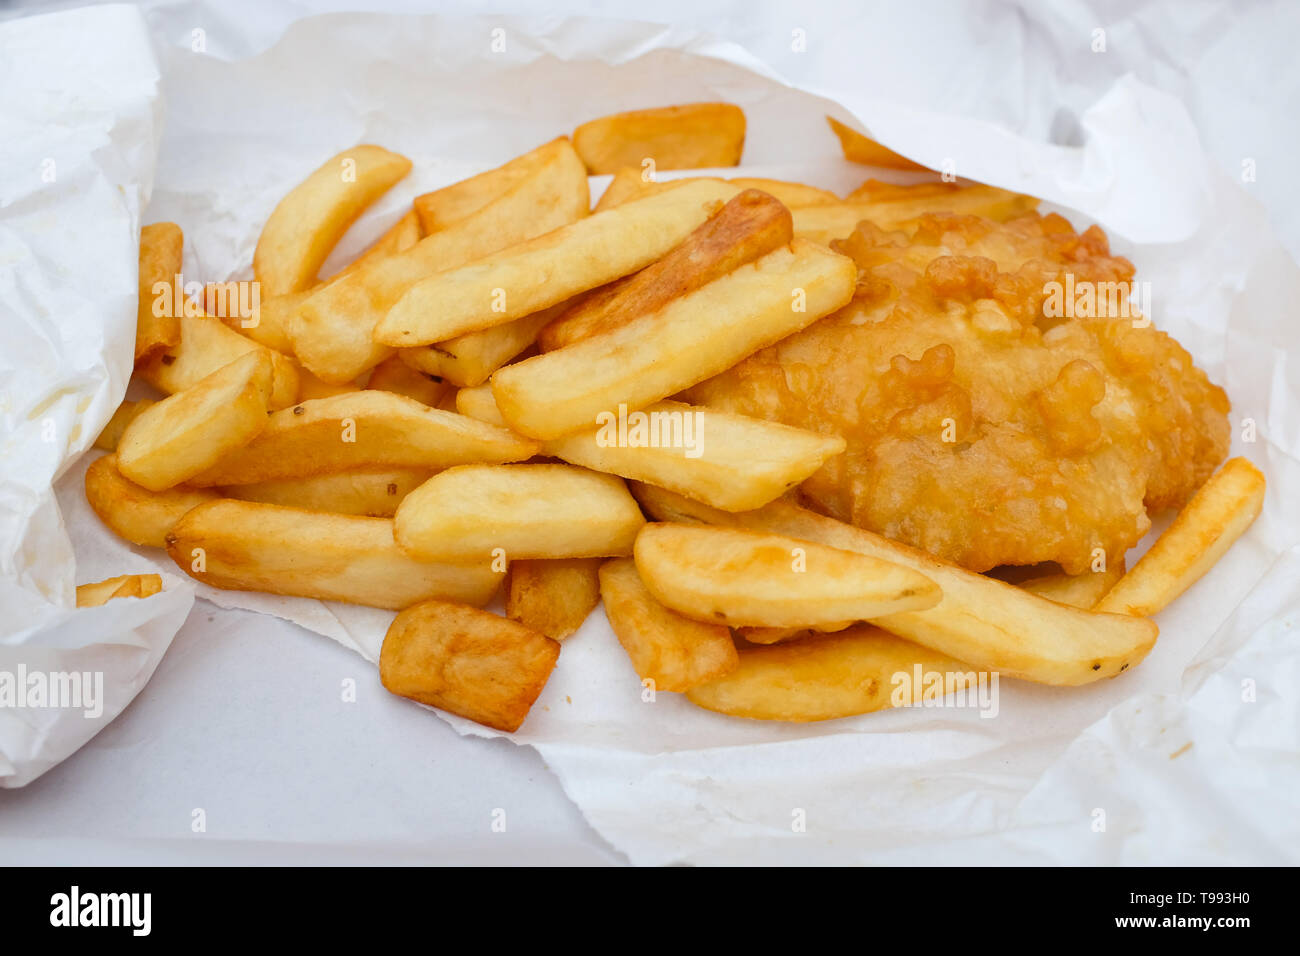 Unwrapped fish and chips. Stock Photo